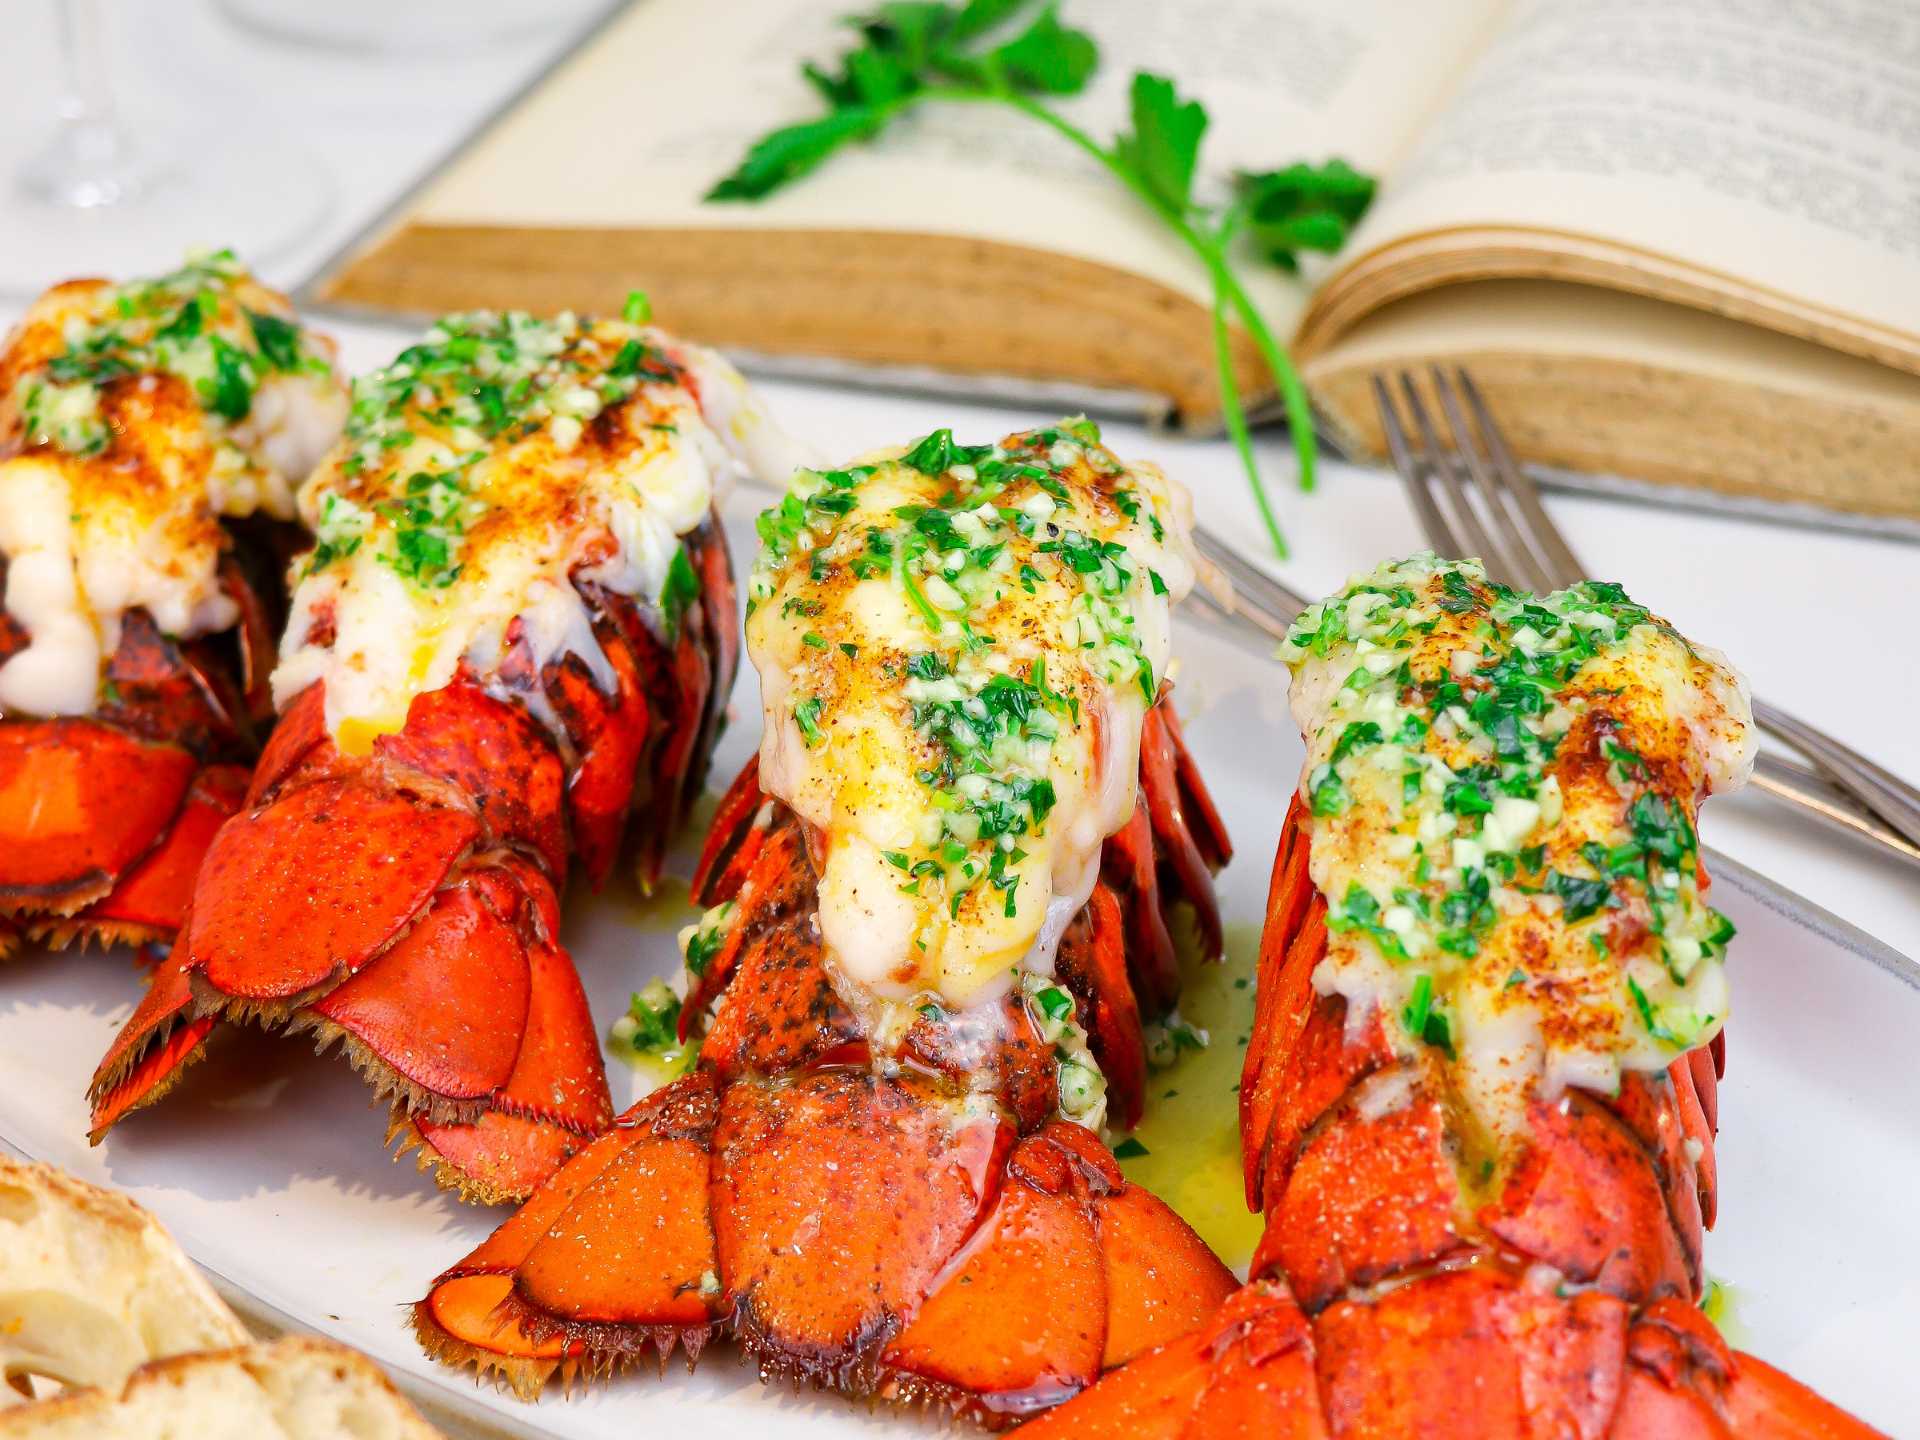 Preparing Lobster Tails - How to Prepare Lobster Tails – Sizzlefish